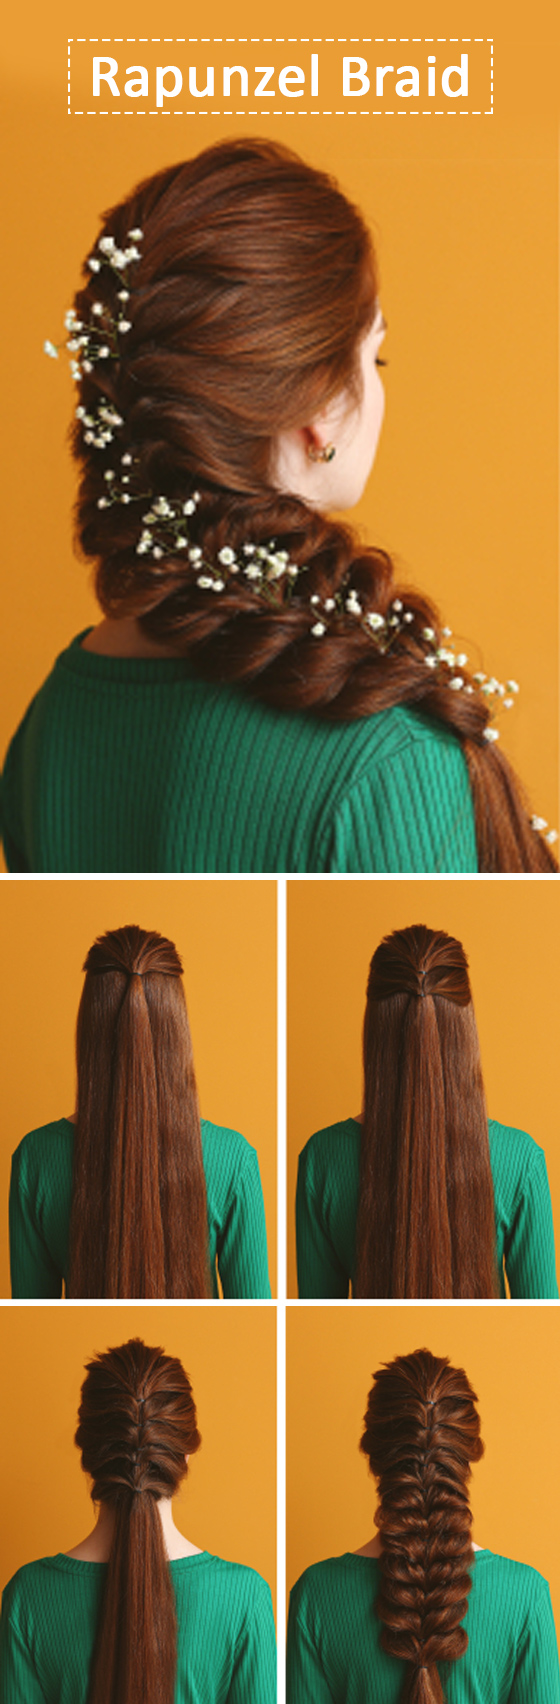 How to create a simple Rapunzel hairstyle